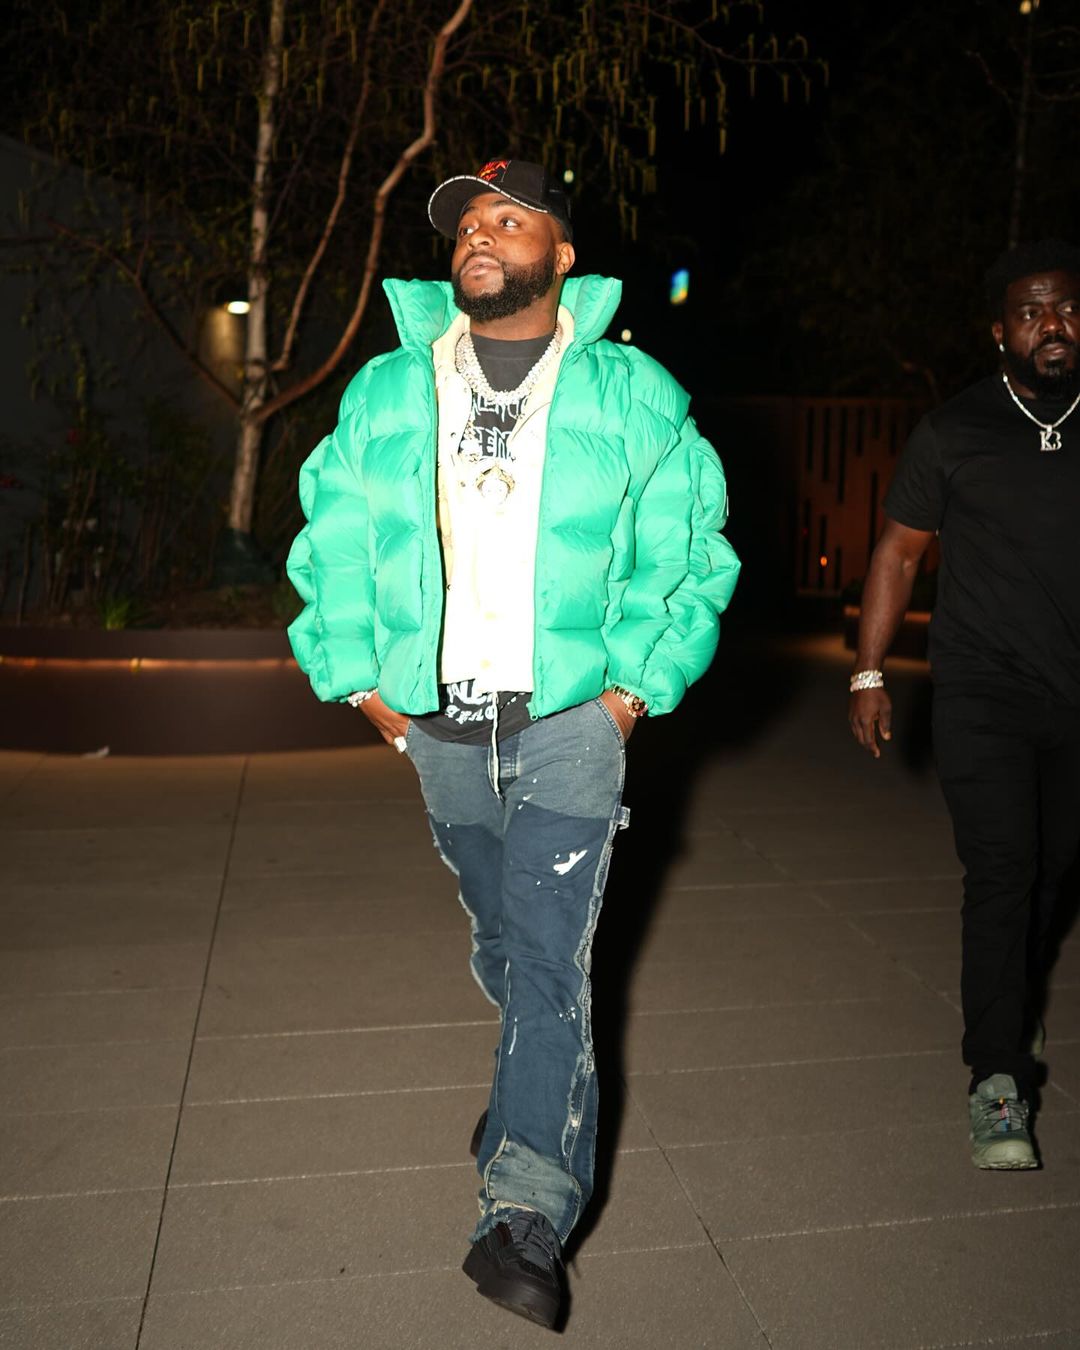 Davido crowns himself Nigeria’s only GOAT